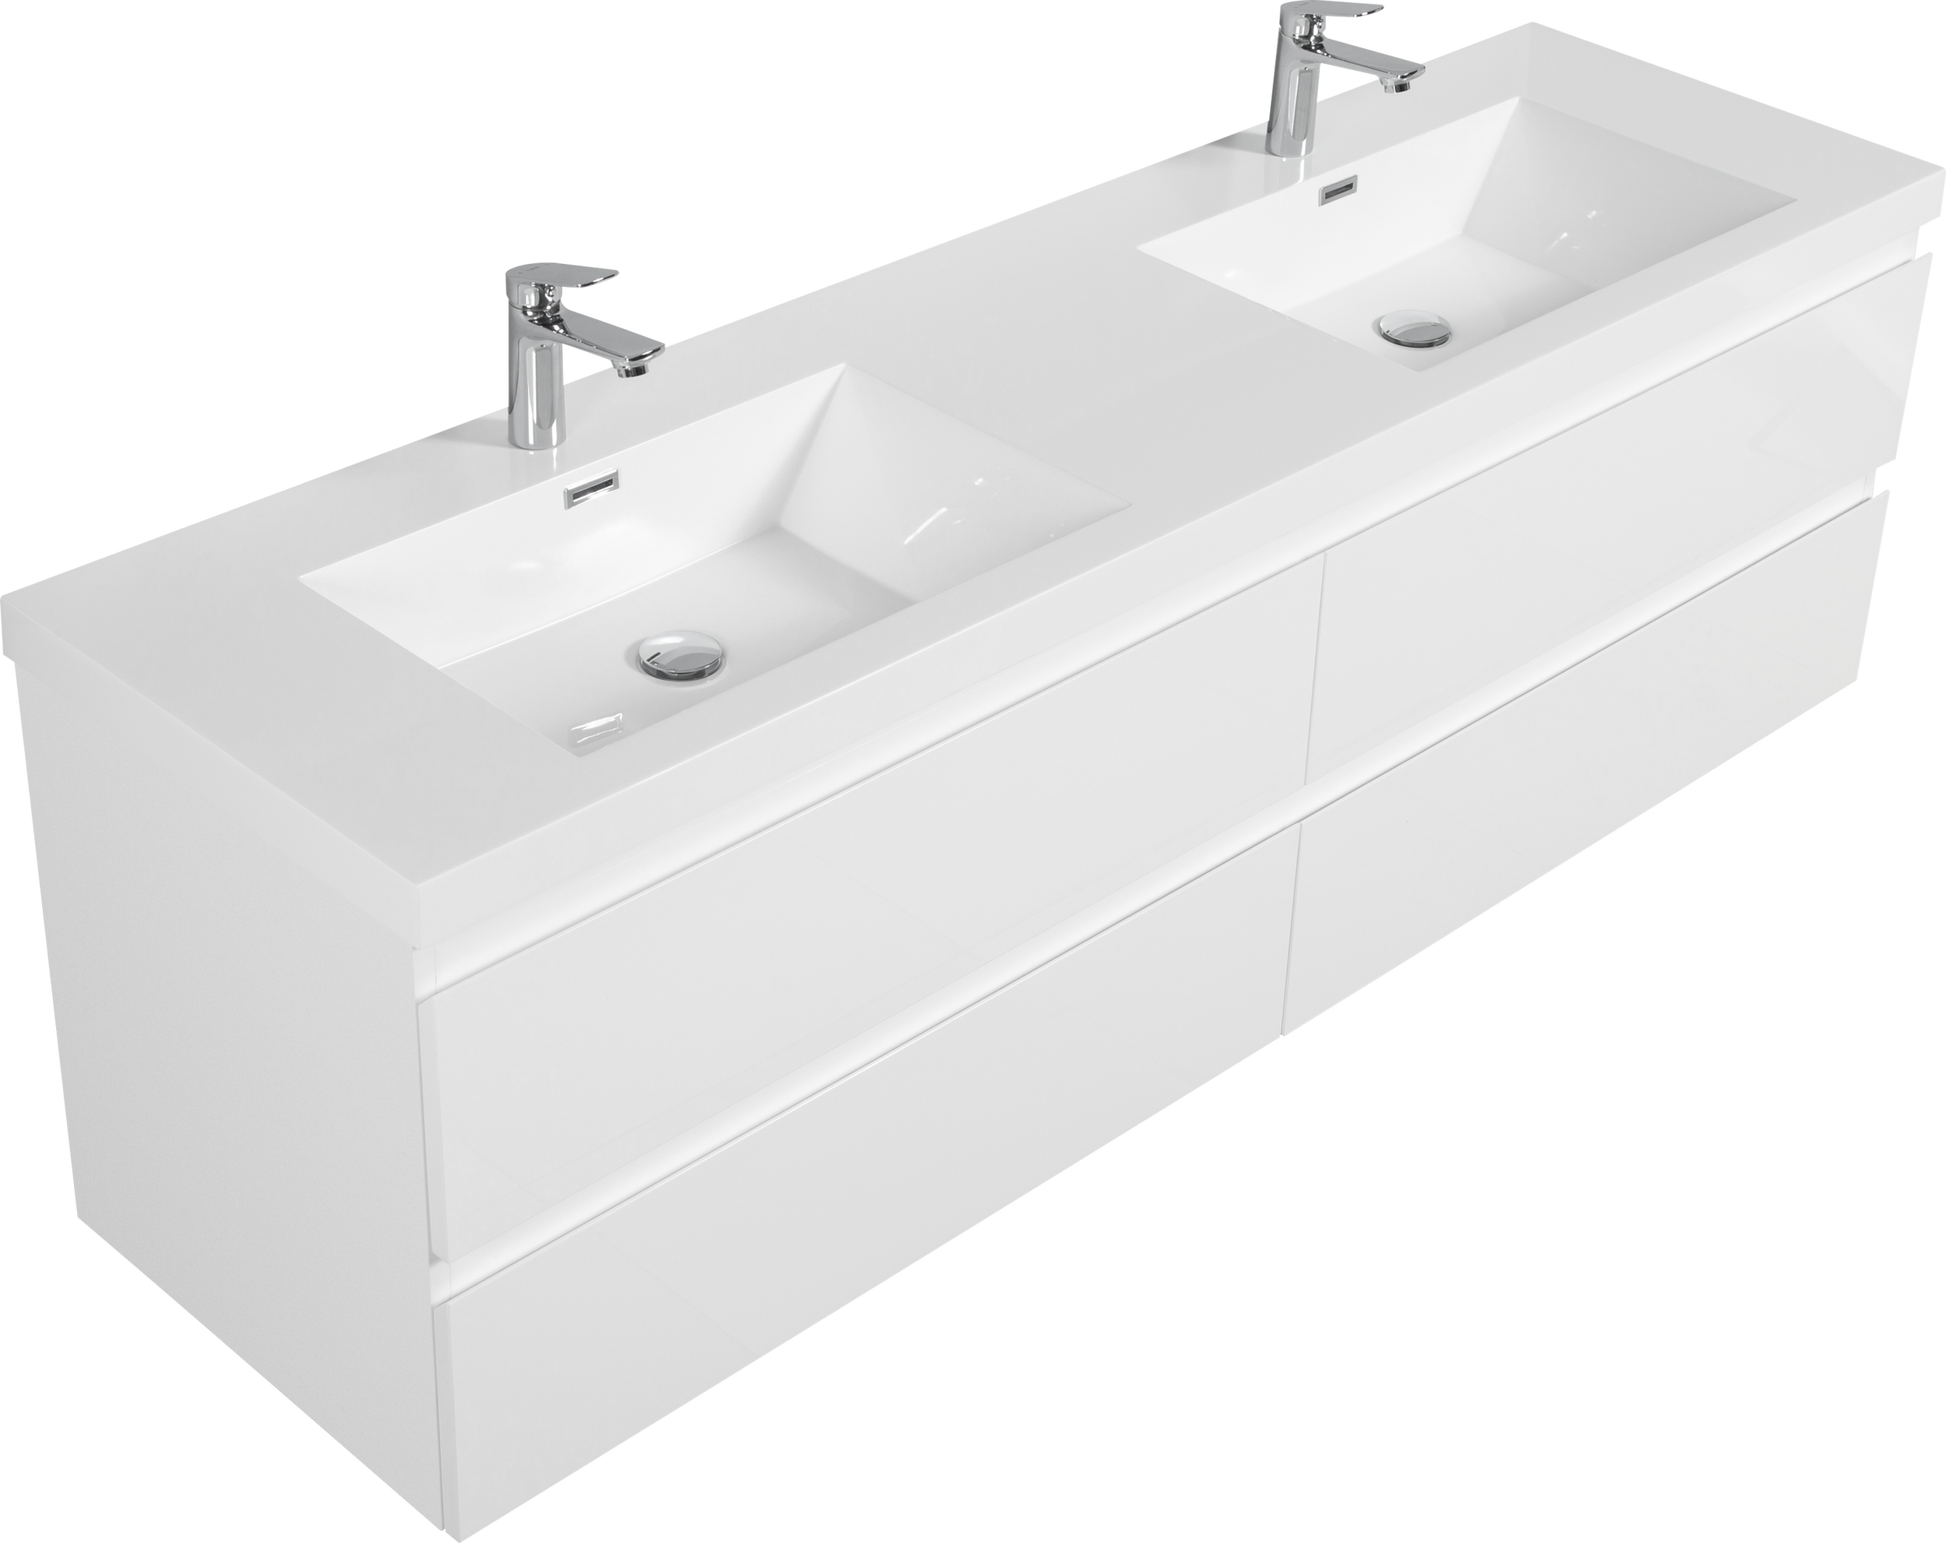 72" Floating Bathroom Vanity with Sink, Modern Wall 4+-white-wall mounted-mdf